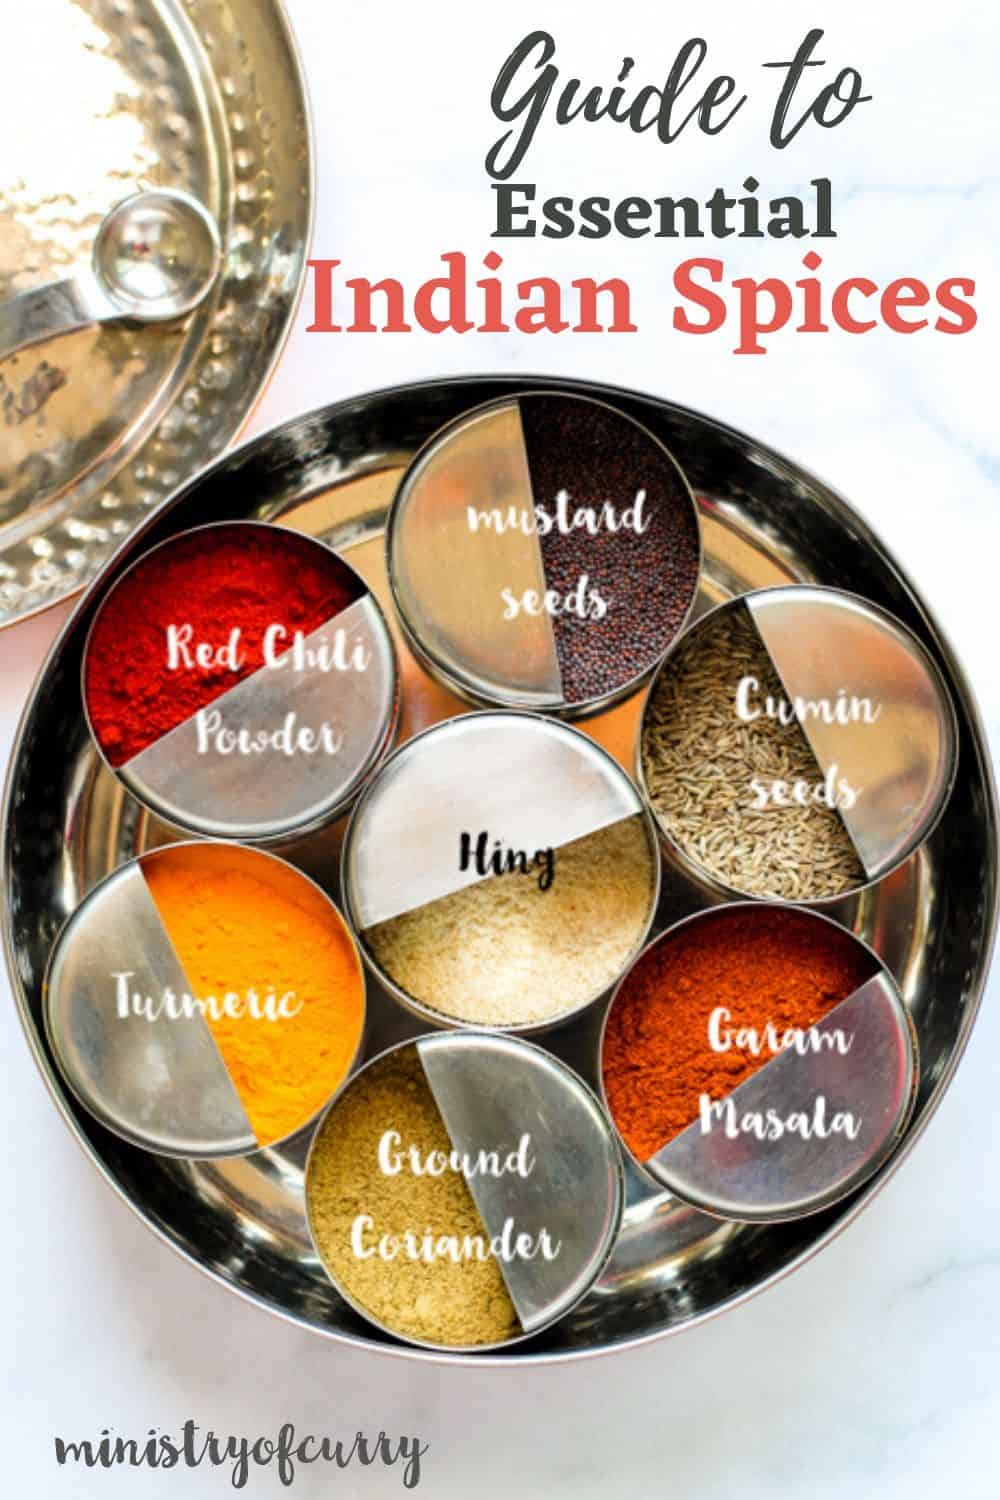 Essential Spices 